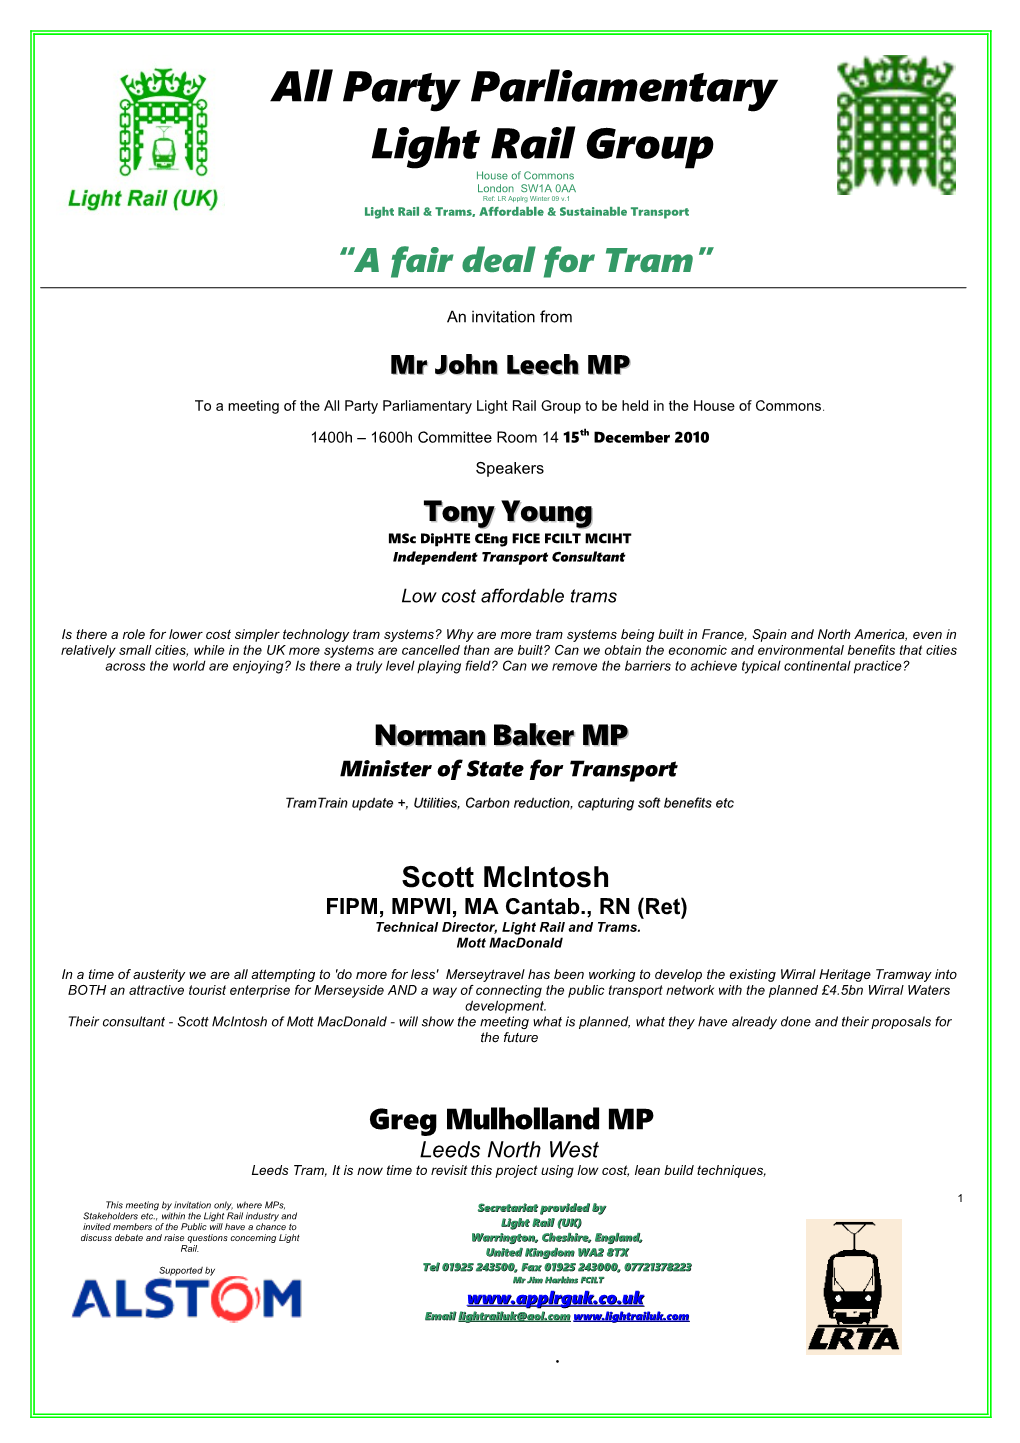 All-Party Parliamentary Group for Light Rail